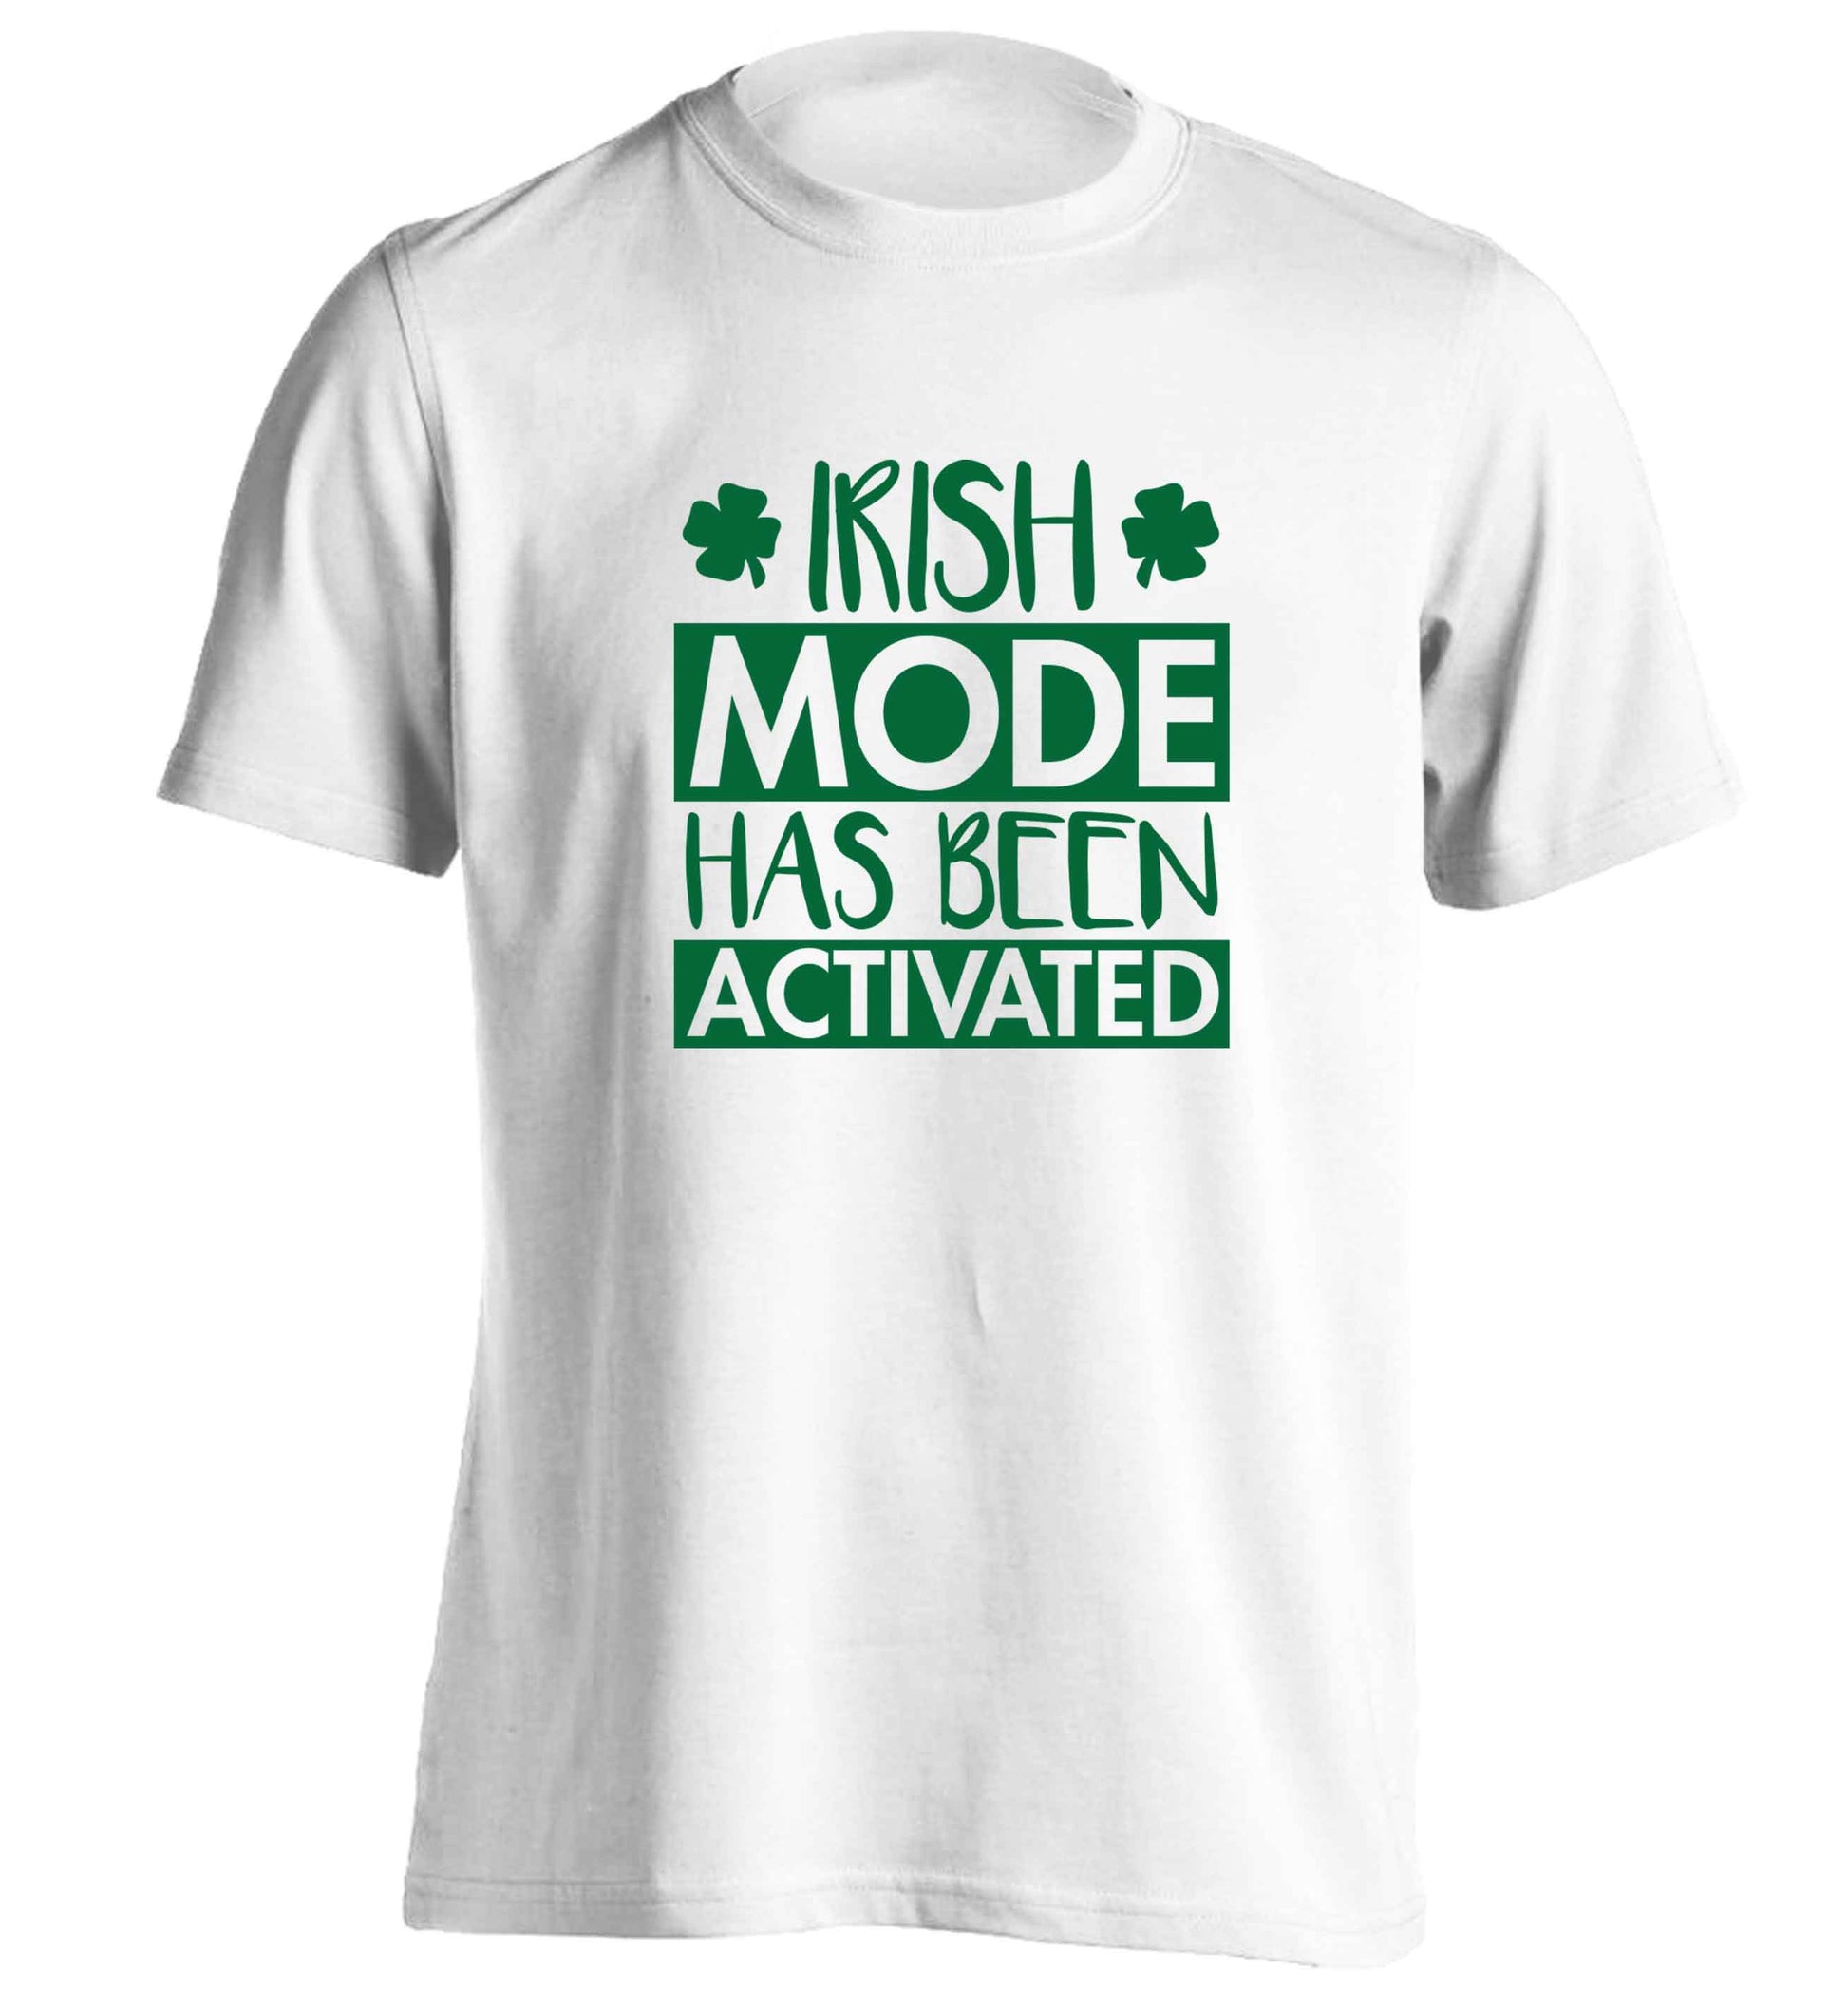 Irish mode has been activated adults unisex white Tshirt 2XL